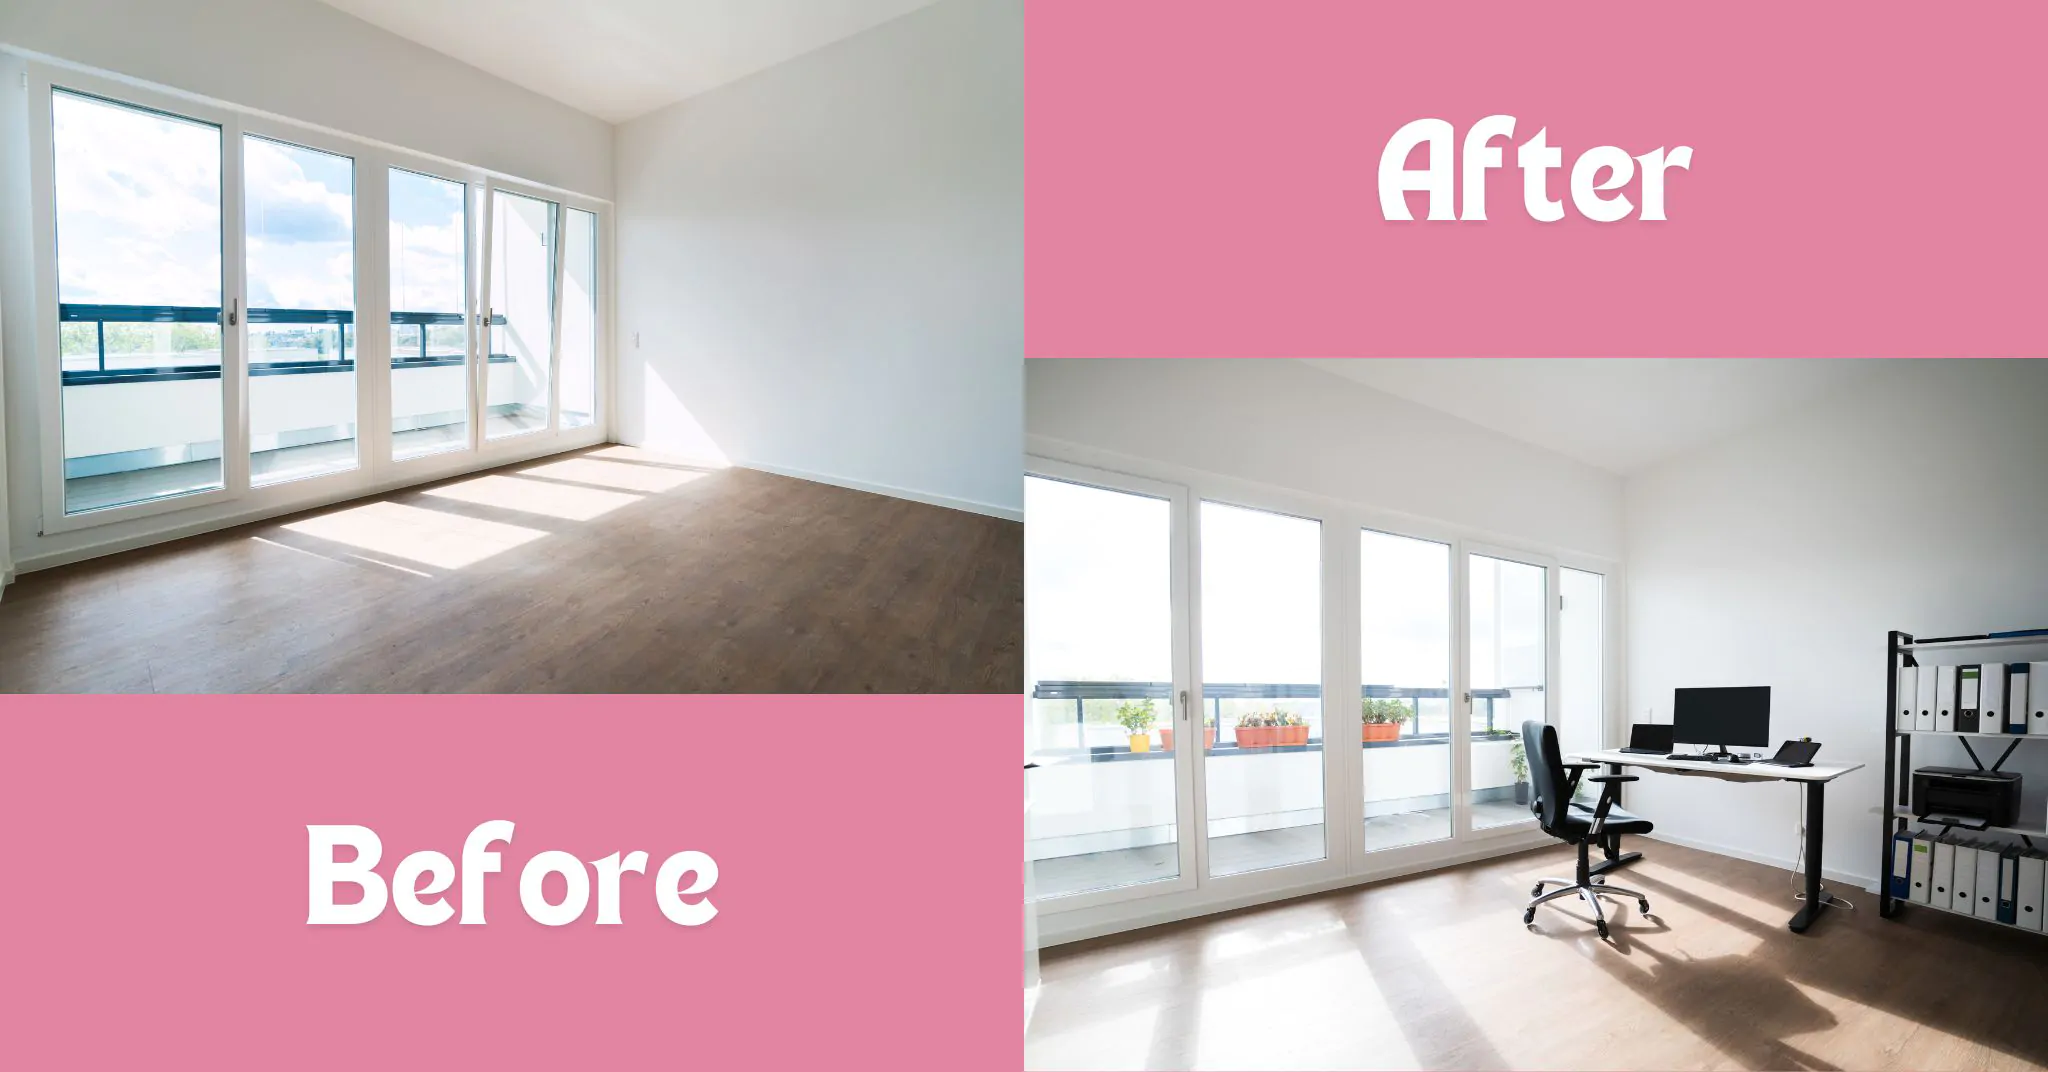 Office Room Before and After Remodeling